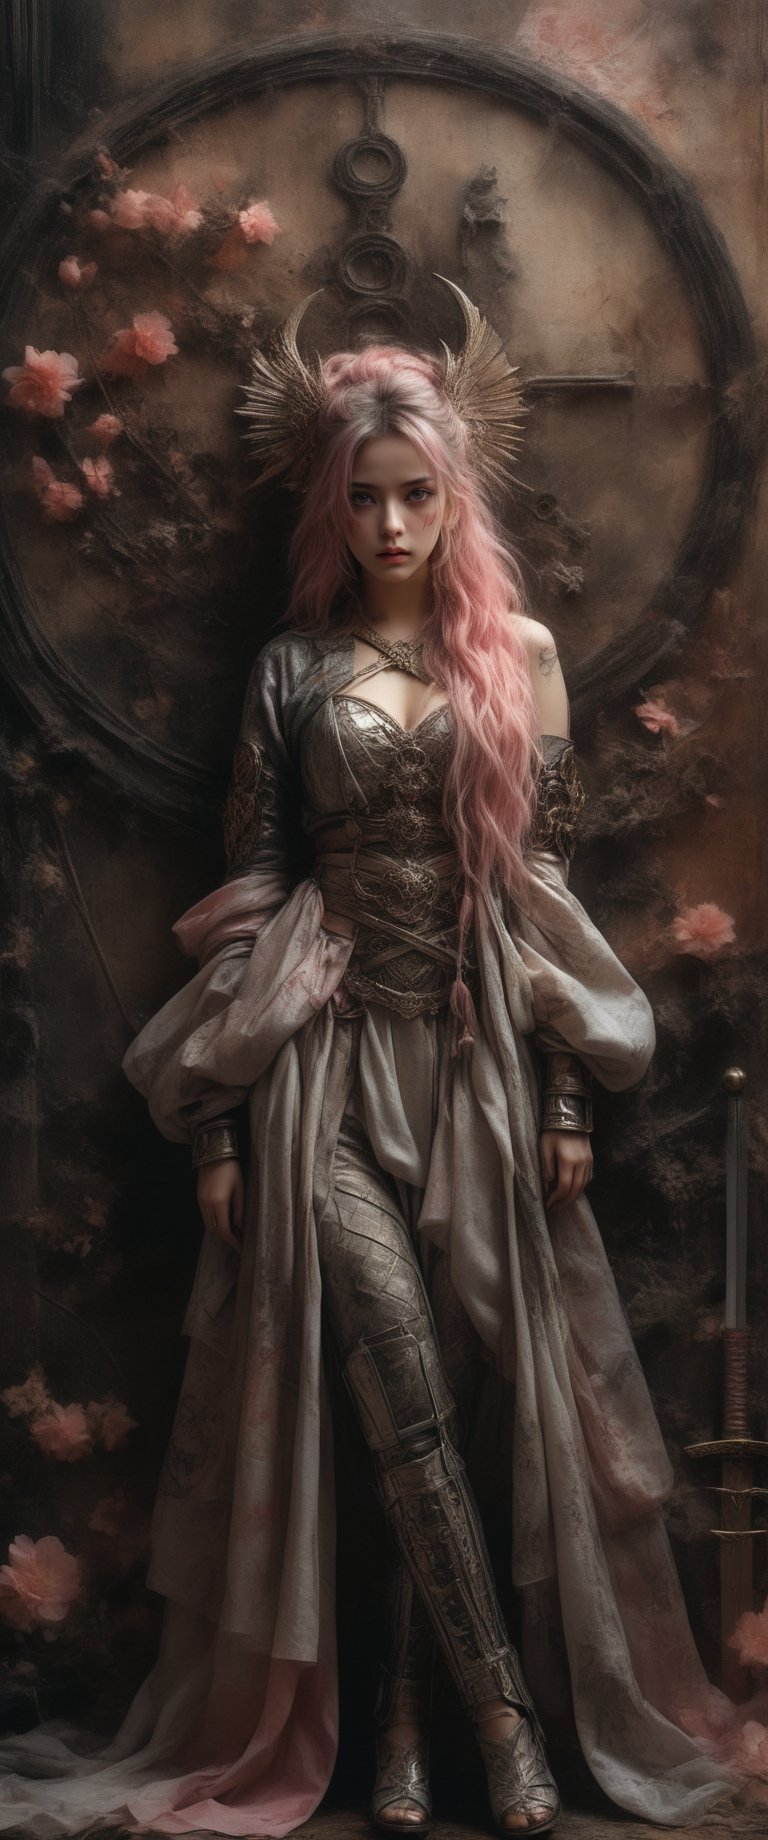 breathtaking RAW photo of female ((THigh quality concept art portrait featuring a fantastic and beautiful and fair 18 years old whit Silver pink hair and Hazel eyes Caucasian o lot of color Elven women(Bella Delphine) whit drawn on weathered parchment, using lord of the rings or dungeons and dragons, character sheet, perfect anatomy, parchment serves as a canvas decorated with ancient runes, made by hand. sketches drawn, by Boris Vallejo, high details,





)), dark and moody style, perfect face, outstretched perfect hands . masterpiece, professional, award-winning, intricate details, ultra high detailed, 64k, dramatic light, volumetric light, dynamic lighting, Epic, splash art .. ), by james jean $, roby dwi antono $, ross tran $. francis bacon $, michal mraz $, adrian ghenie $, petra cortright $, gerhard richter $, takato yamamoto $, ashley wood, tense atmospheric, , , , sooyaaa,IMGFIX,Comic Book-Style,Movie Aesthetic,action shot,photo r3al,bad quality image,oil painting, cinematic moviemaker style,Japan Vibes,H effect,koh_yunjung ,koh_yunjung,kwon-nara,sooyaaa,colorful,bones,,armor,han-hyoju-xl ,DonMn1ghtm4reXL, ct-fujiii
,oiran,furisode,ct-jeniiii, ct-goeuun,yaya, HanFu,golden kimono,kamado nezuko,sword maiden,theresa apocalypse,koling,ct-rosseeiiee,ct-rosseeiiee,ct-virtual